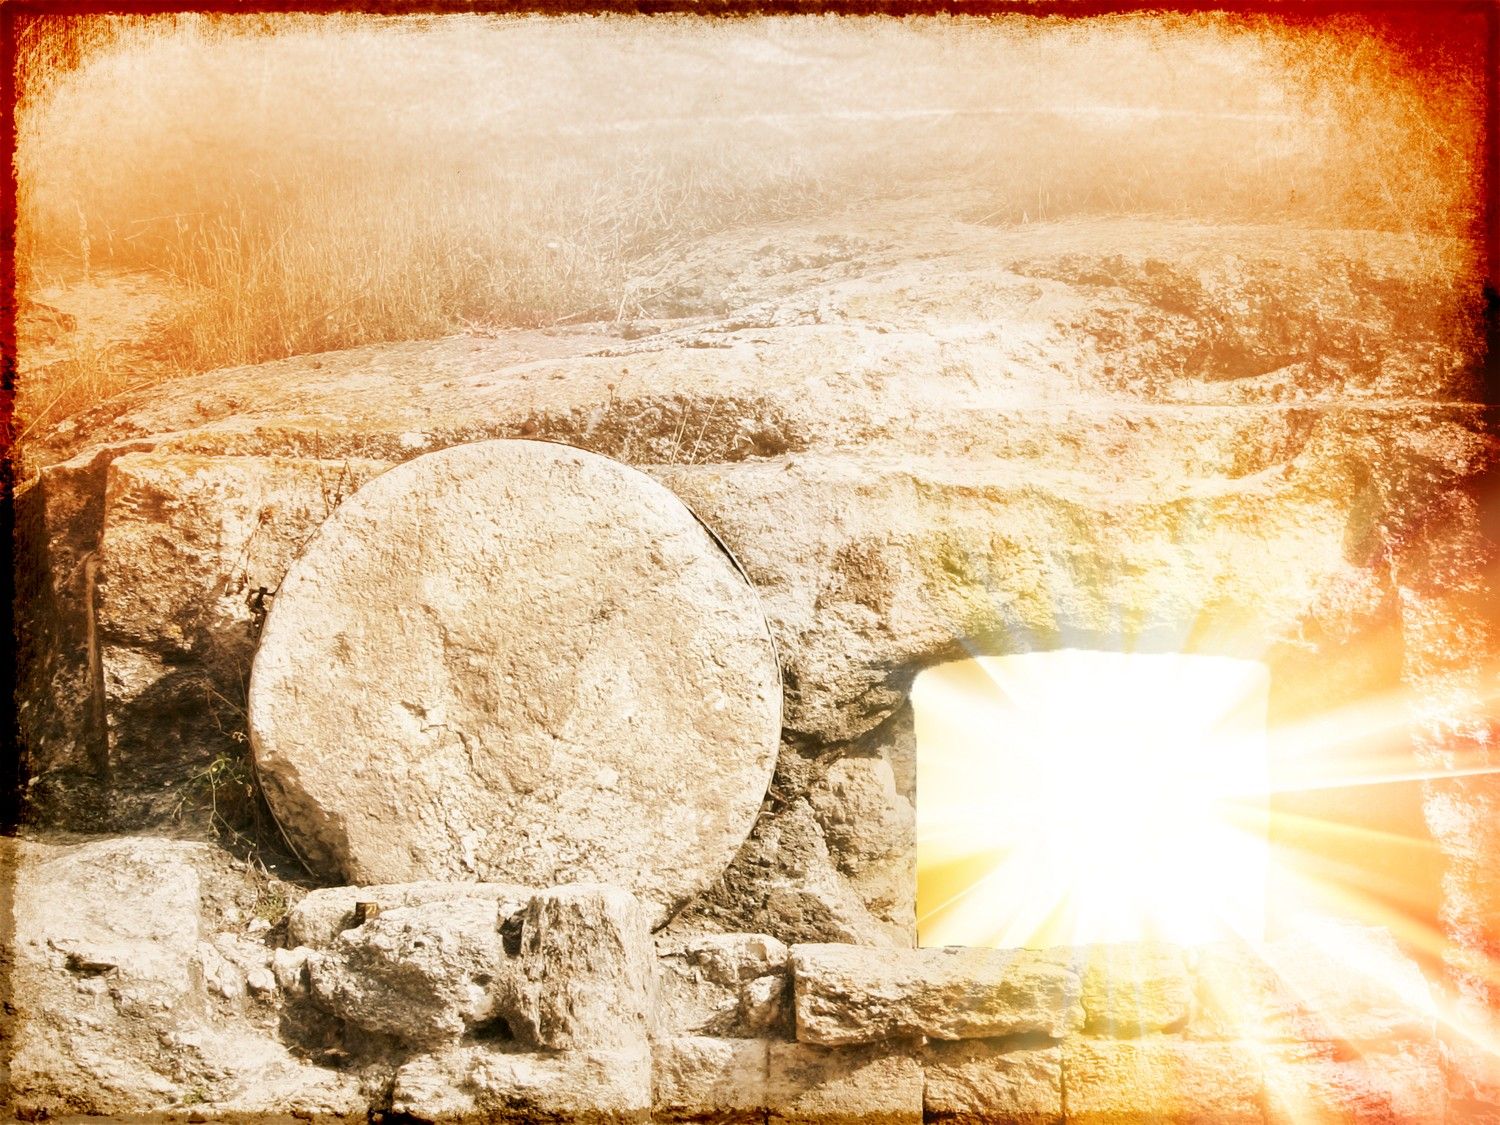 Happy Easter Wishes Resurrection Jesus Alive Risen From Dead Empty Tomb